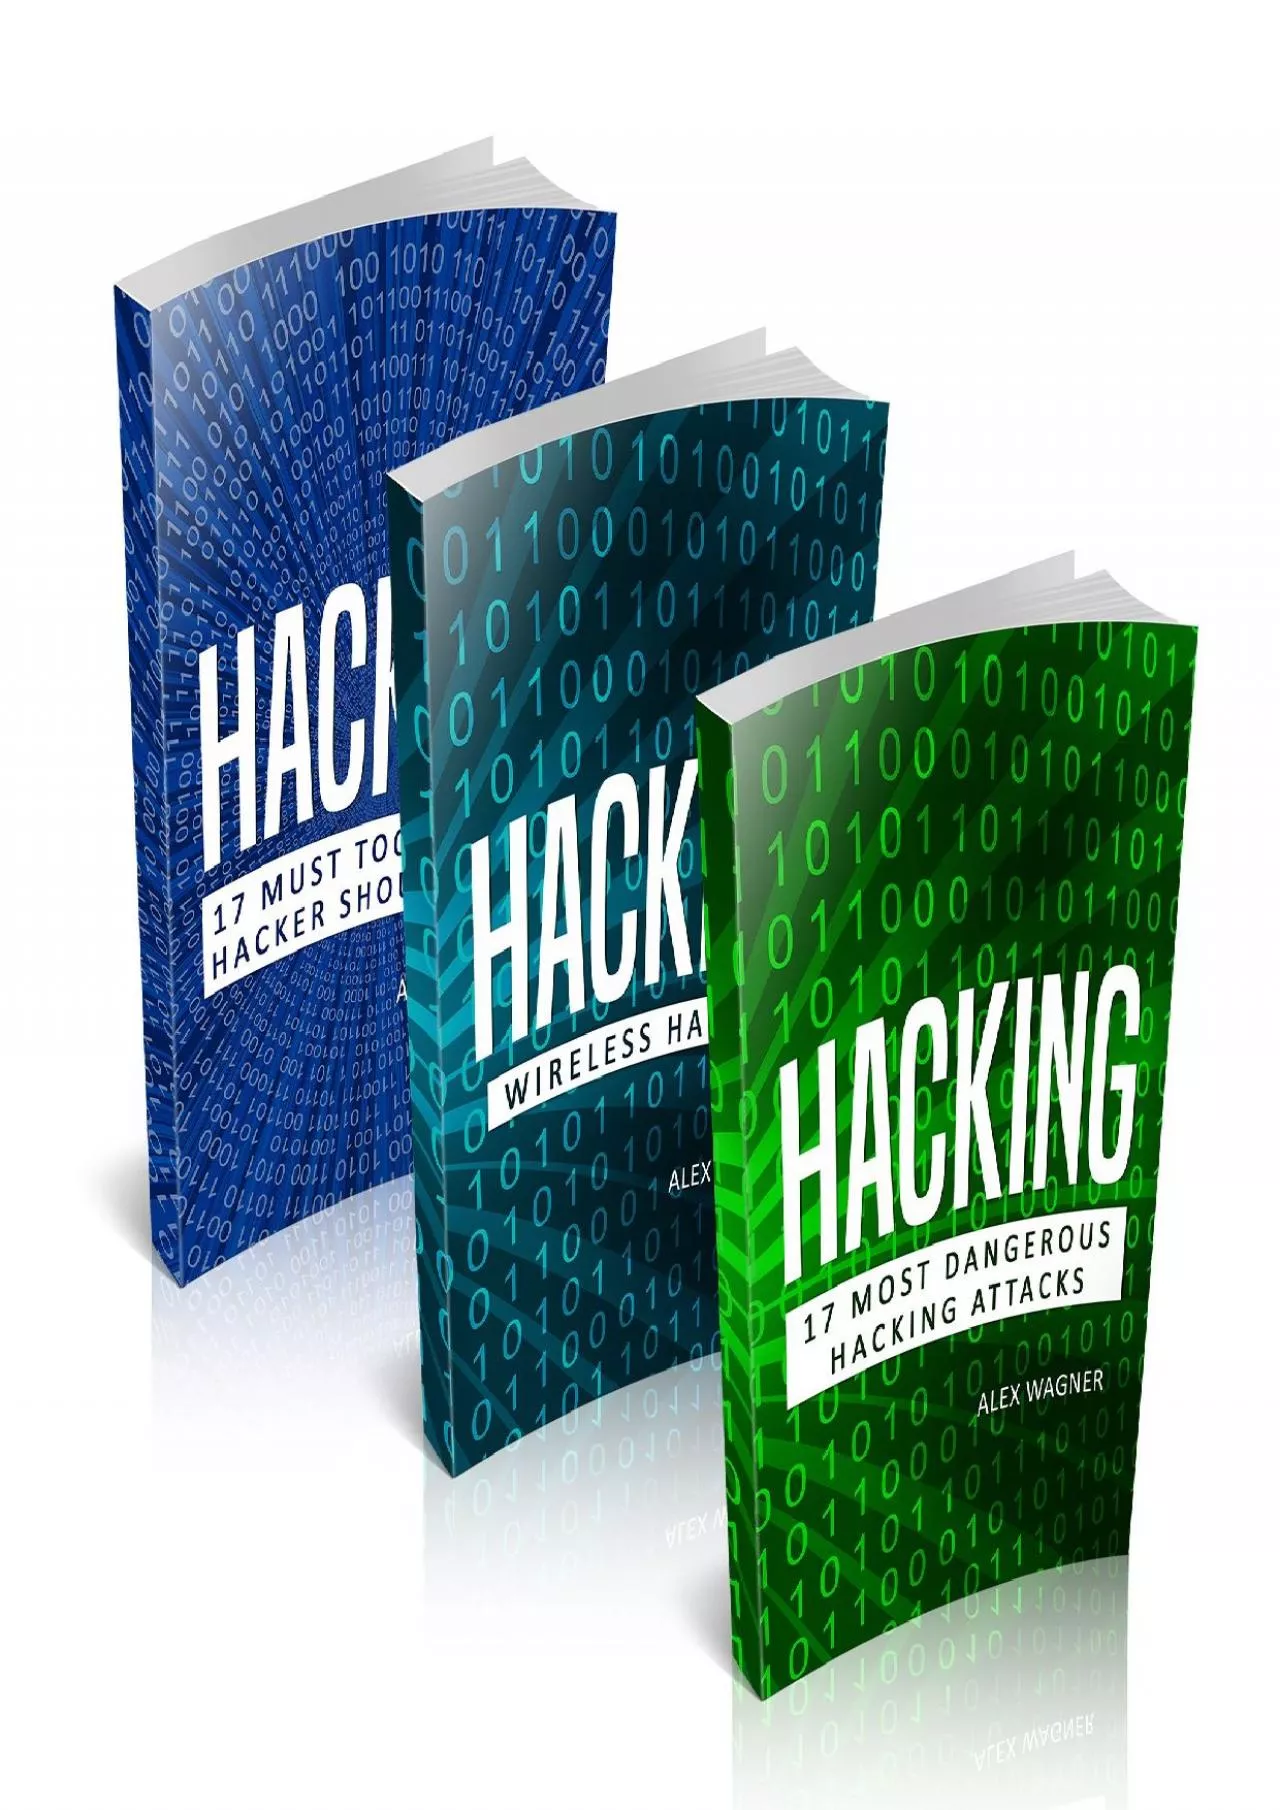 [FREE]-Hacking: How to Hack, Penetration testing Hacking Book, Step-by-Step implementation